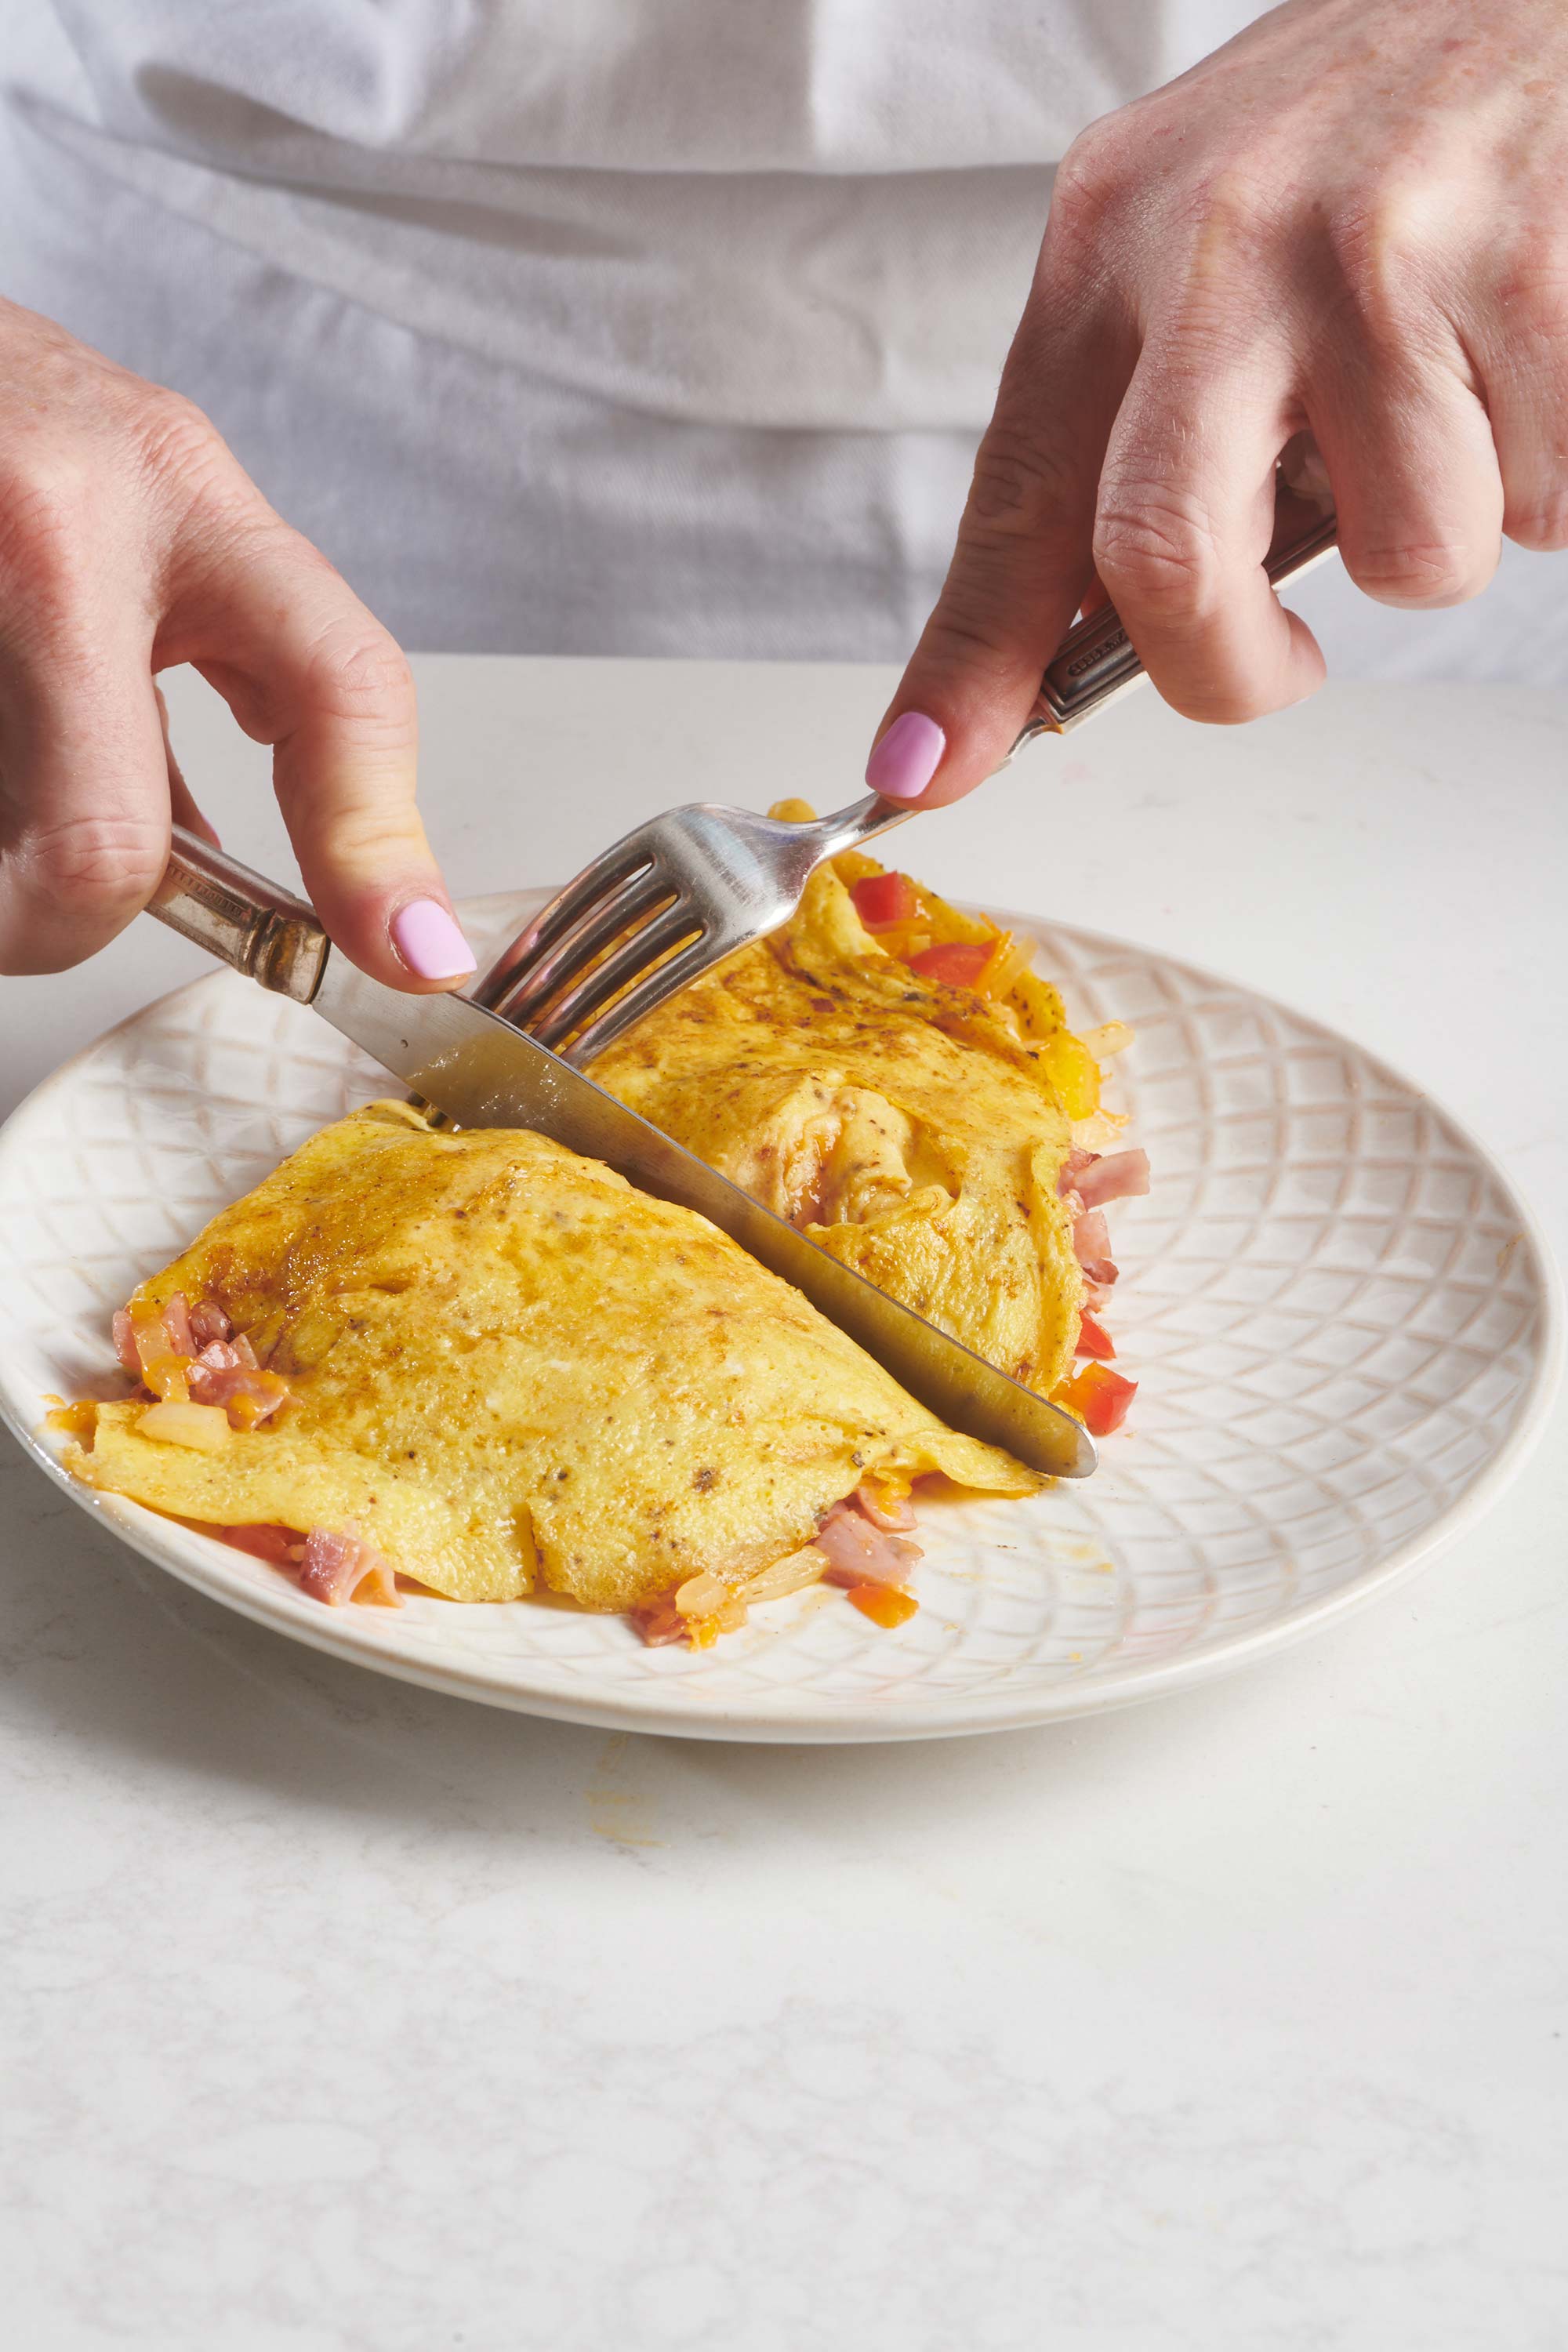 Woman cutting a Denver Omelet with a knife.